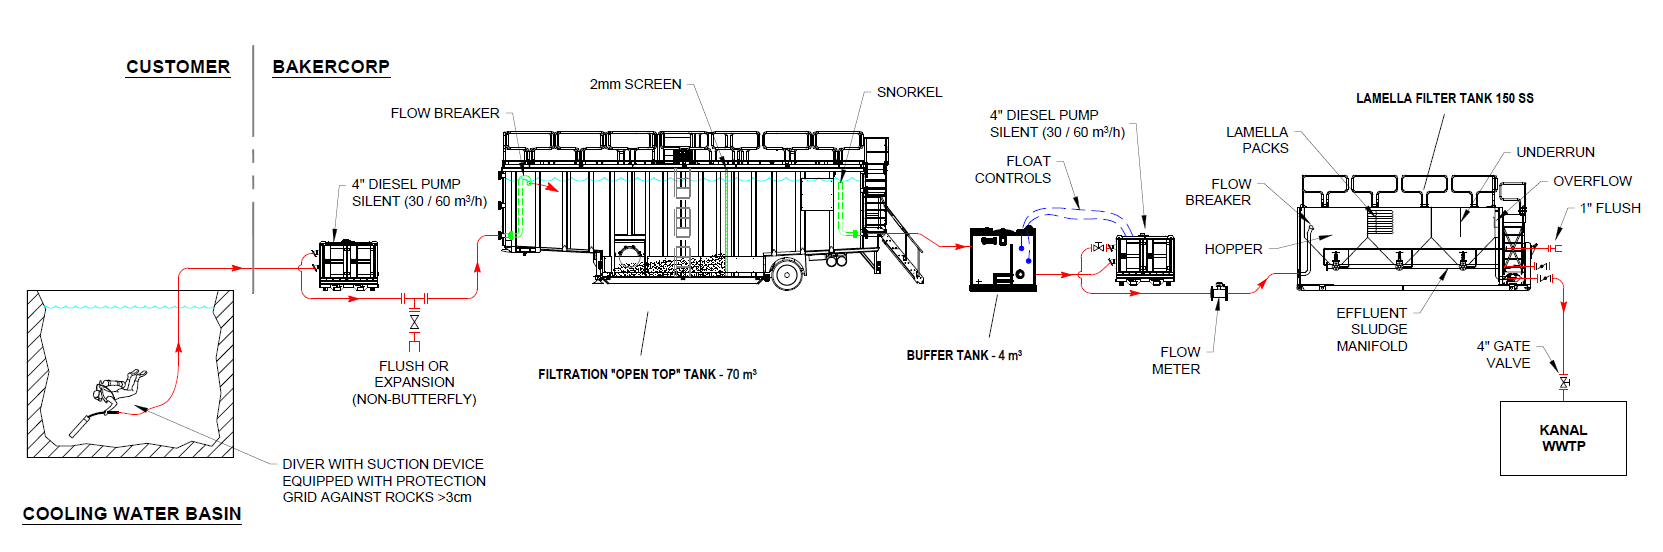 Technical Plan - treatment of cooling water basin